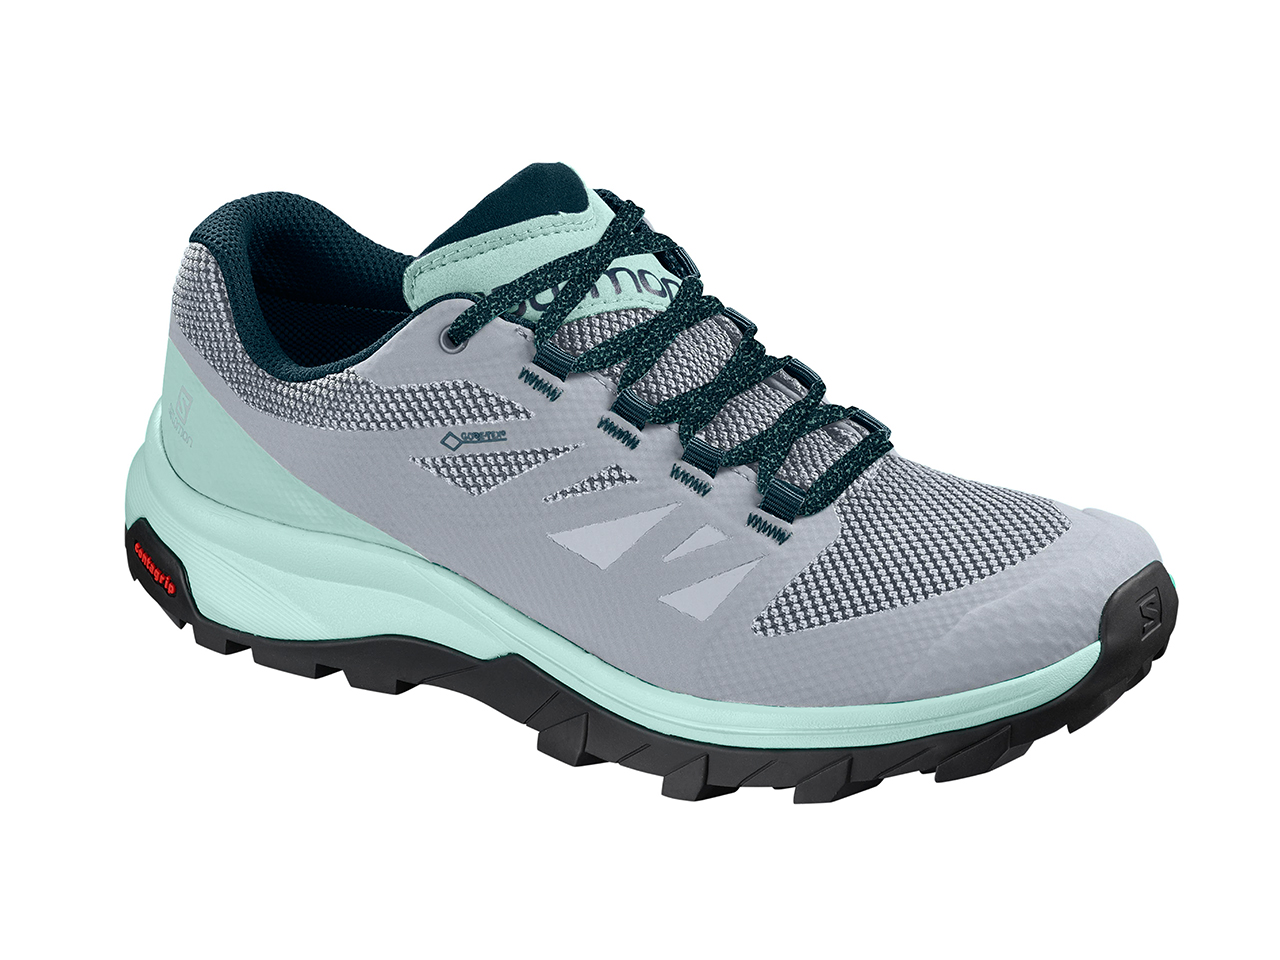 Great running shoes: SALOMON OUTLINE GORE-TEX TRAIL right shoe in grey and blue